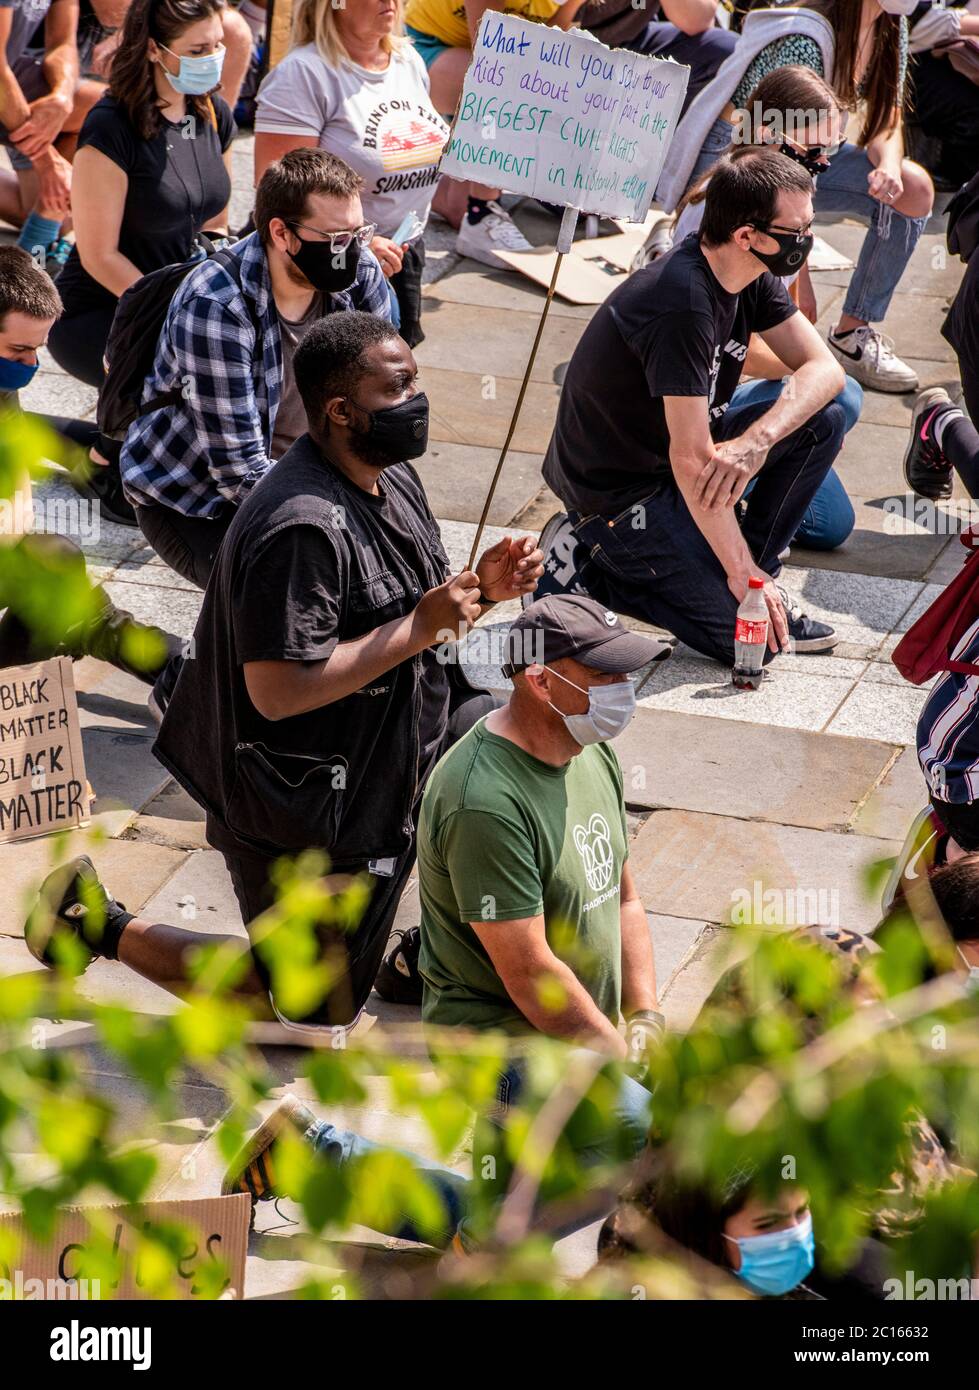 Leeds, 14th June 2020. A big crowd gathered in Leeds today for a very peaceful rally organised by Black Lives Matter and Black Voices Matter to protest against the murder of George Floyd and against racism. Credit: ernesto rogata/Alamy Live News Stock Photo